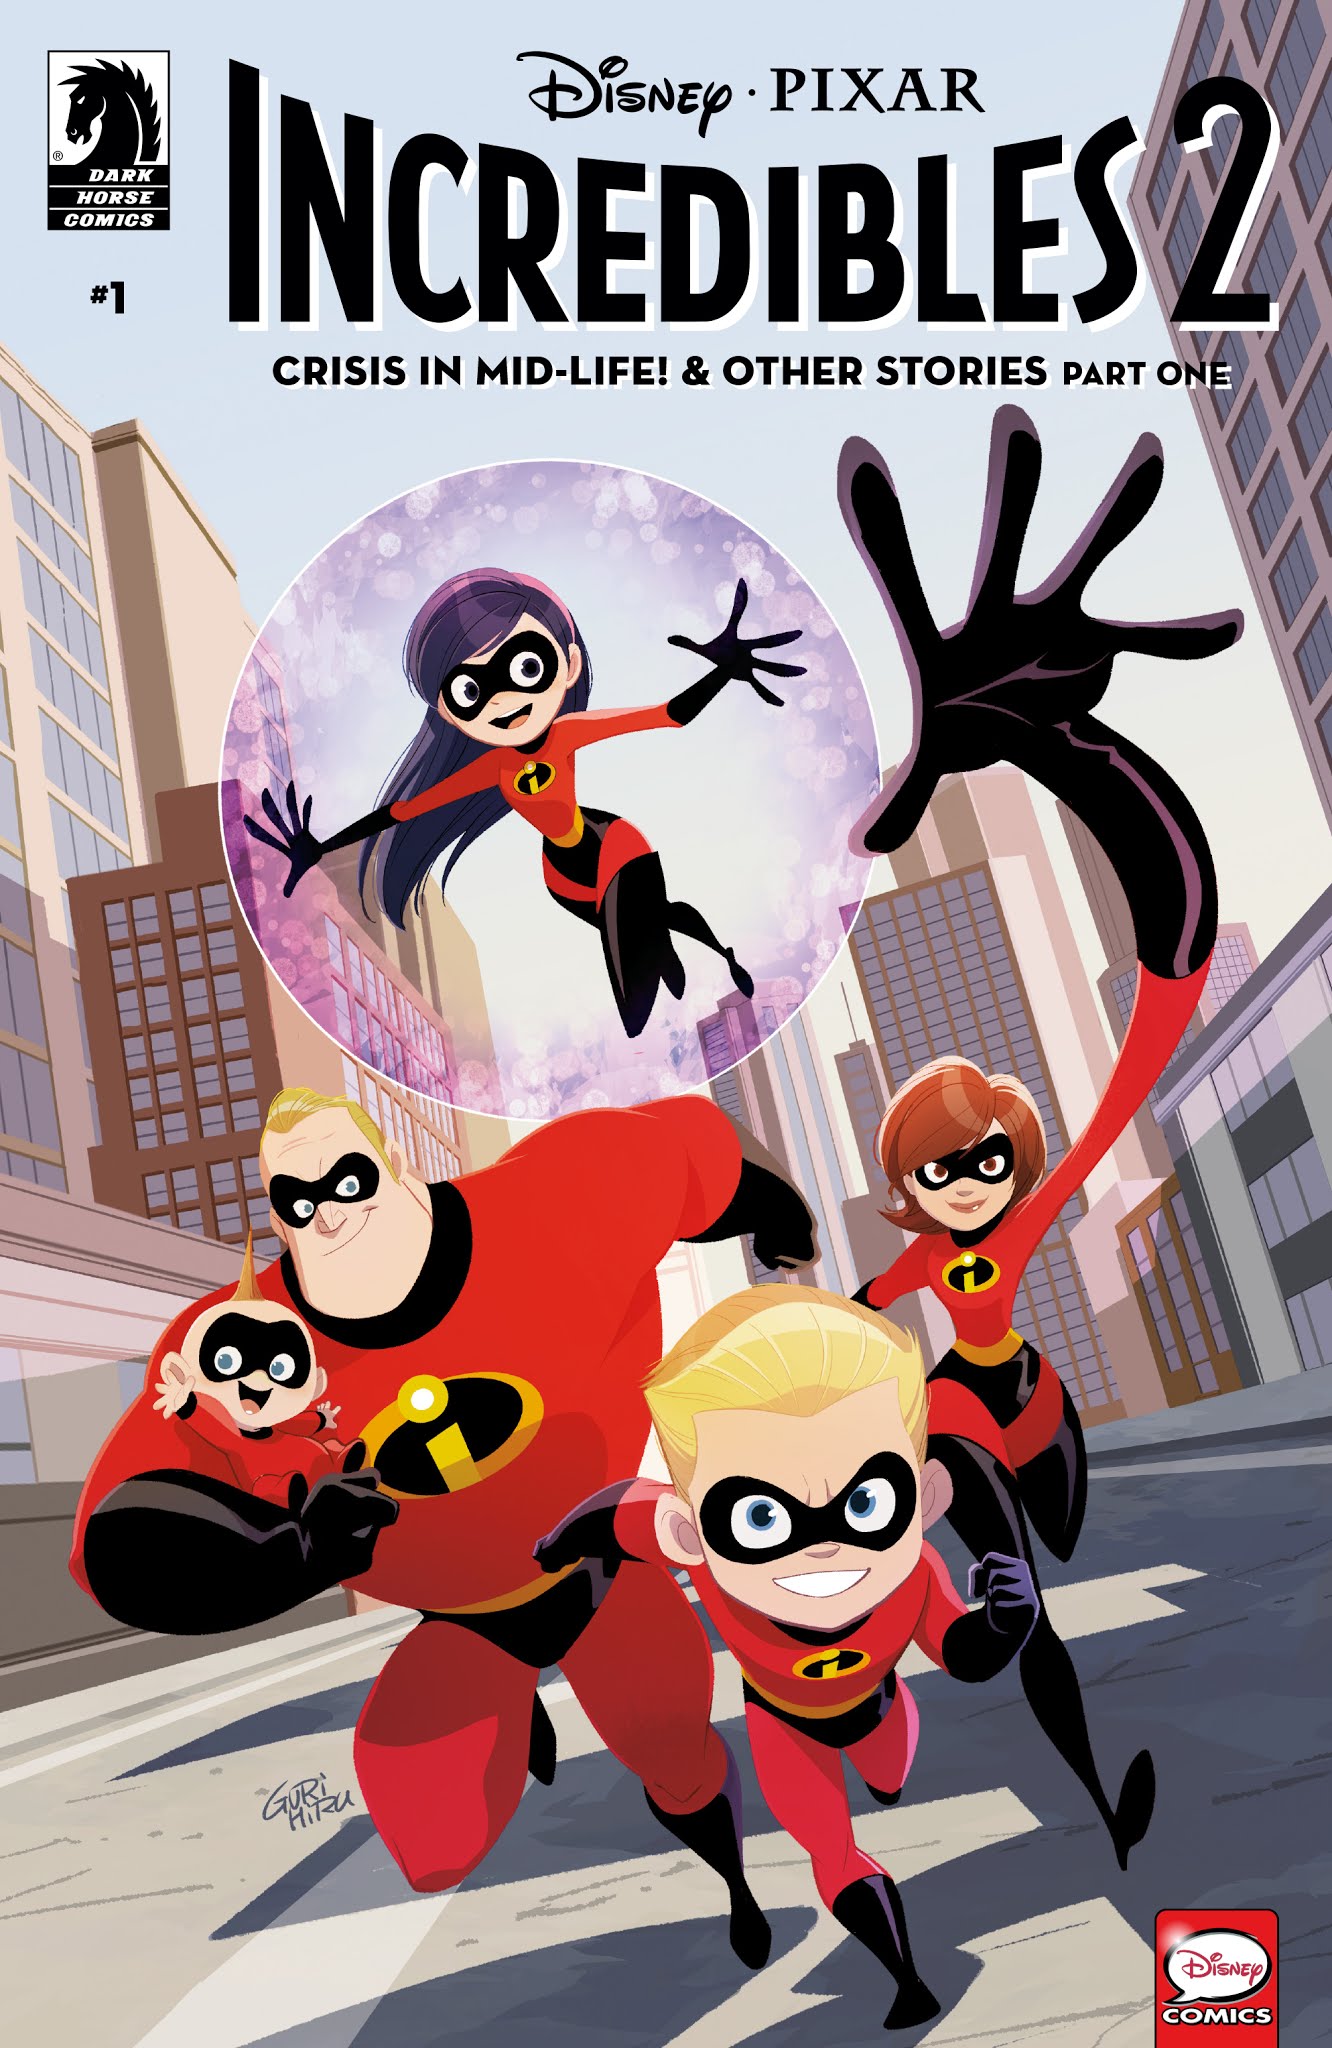 Disney Pixar The Incredibles 2 Crisis In Mid Life Other Stories Issue 1 |  Read Disney Pixar The Incredibles 2 Crisis In Mid Life Other Stories Issue  1 comic online in high